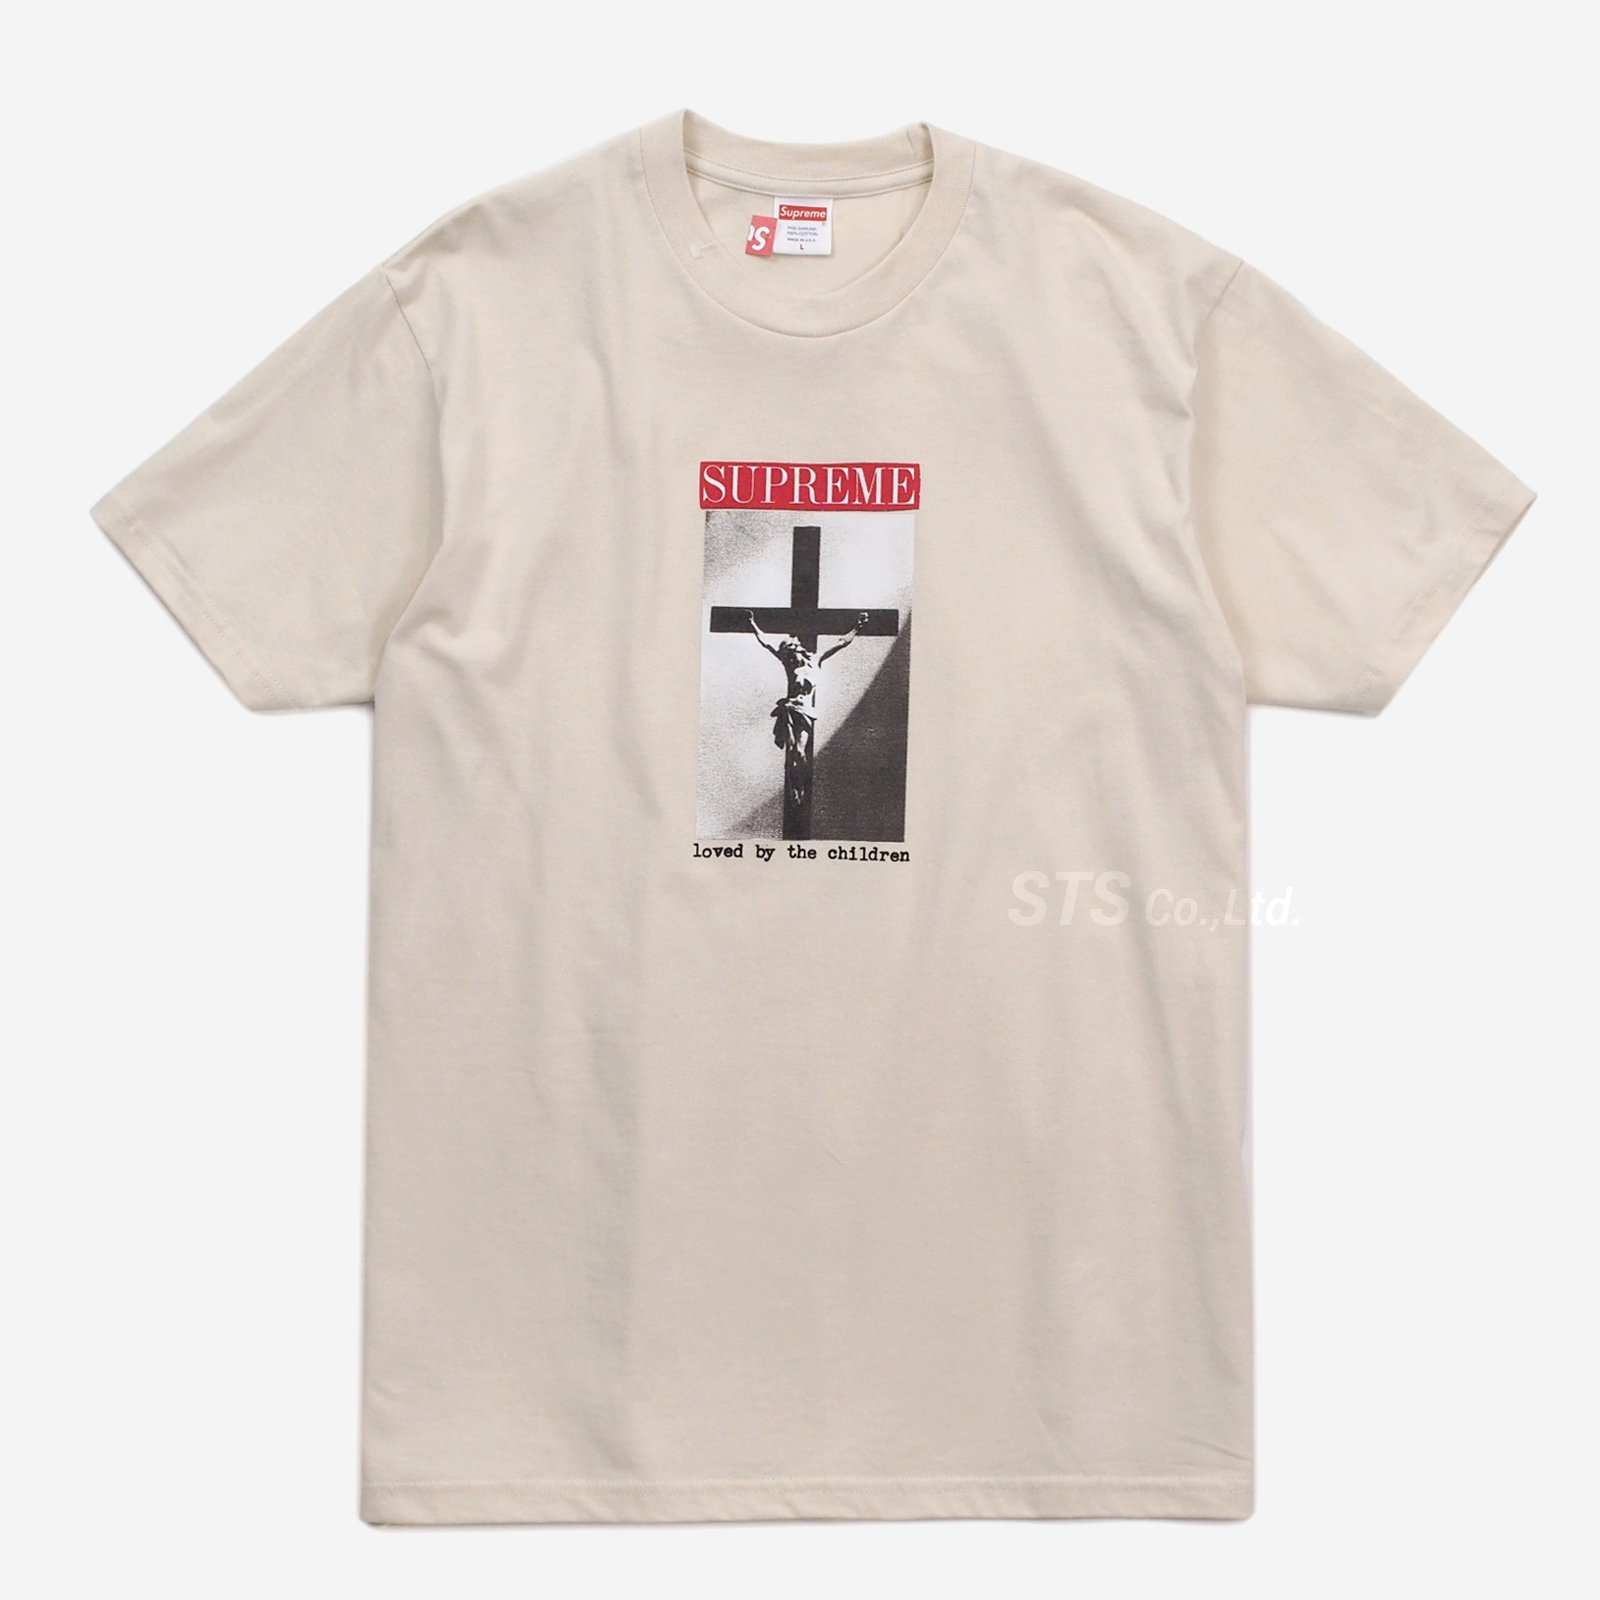 Supreme - Loved By The Children Tee - UG.SHAFT